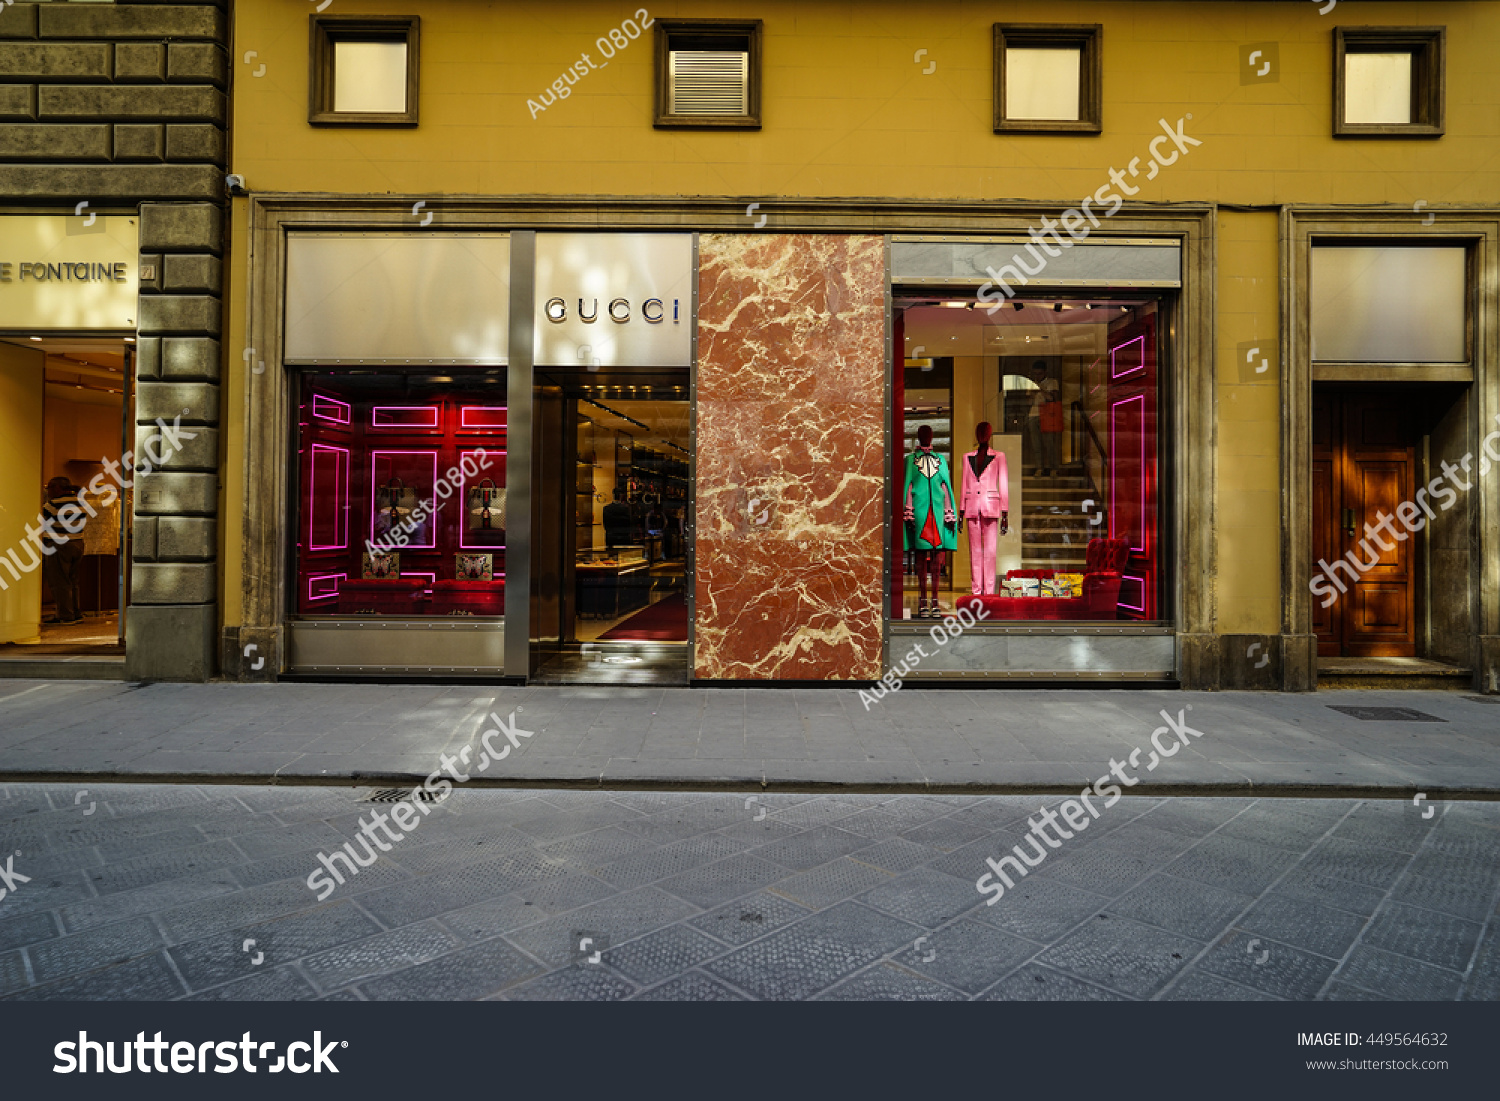 Florence Jun 2016gucci Store Stock Photo (Edit Now) 449564632